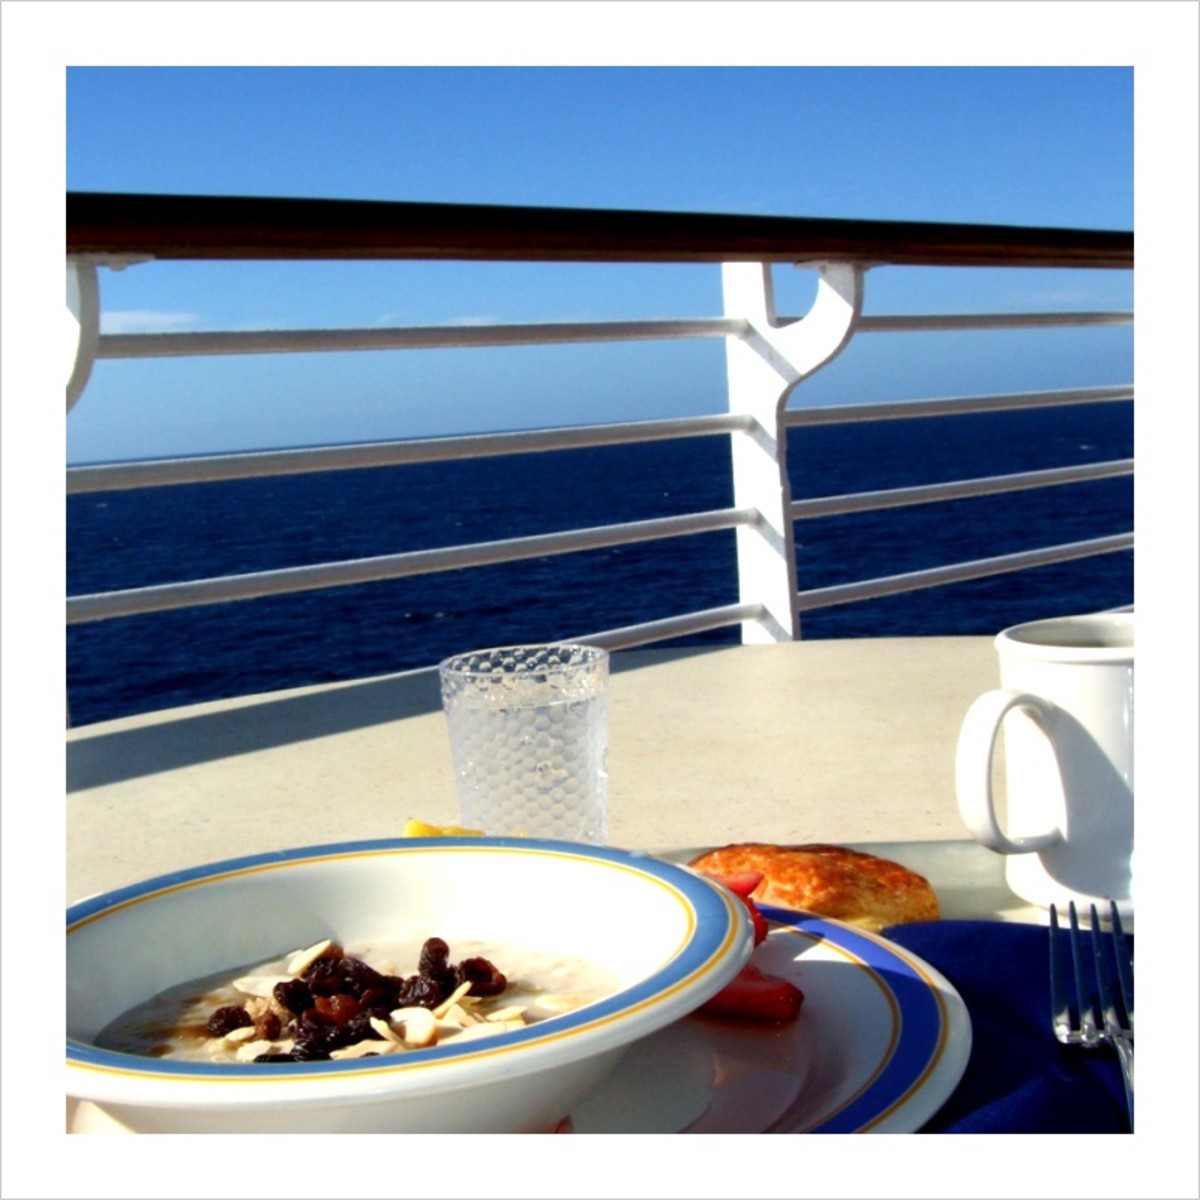 My healthy breakfast and an ocean view.